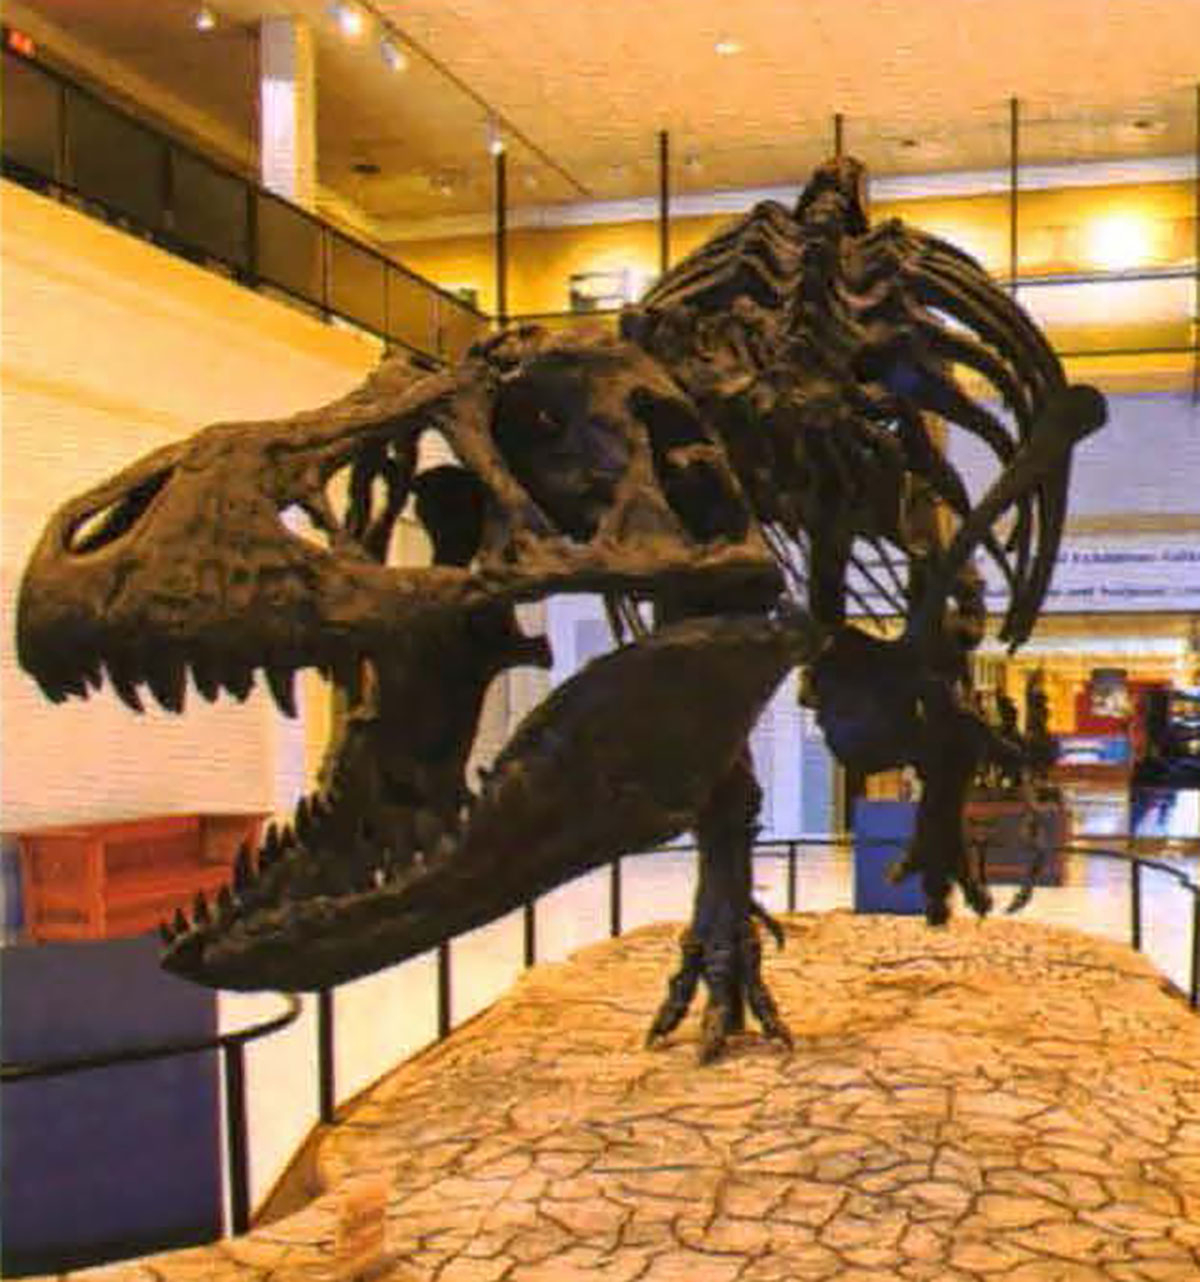 Display of a T. Rex in a museum